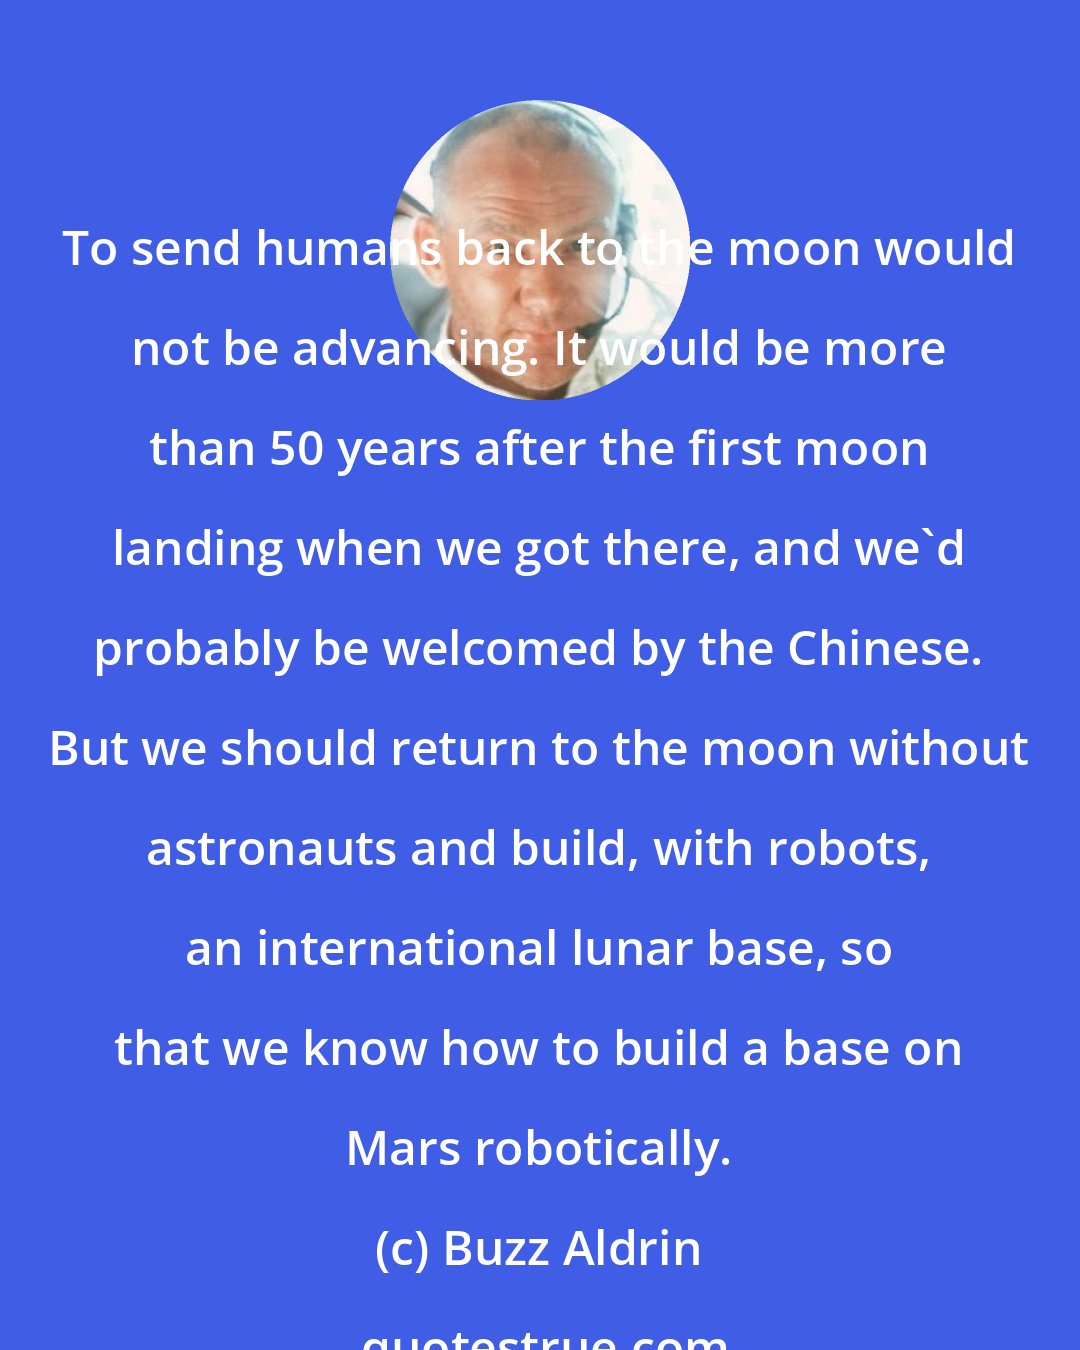 Buzz Aldrin: To send humans back to the moon would not be advancing. It would be more than 50 years after the first moon landing when we got there, and we'd probably be welcomed by the Chinese. But we should return to the moon without astronauts and build, with robots, an international lunar base, so that we know how to build a base on Mars robotically.